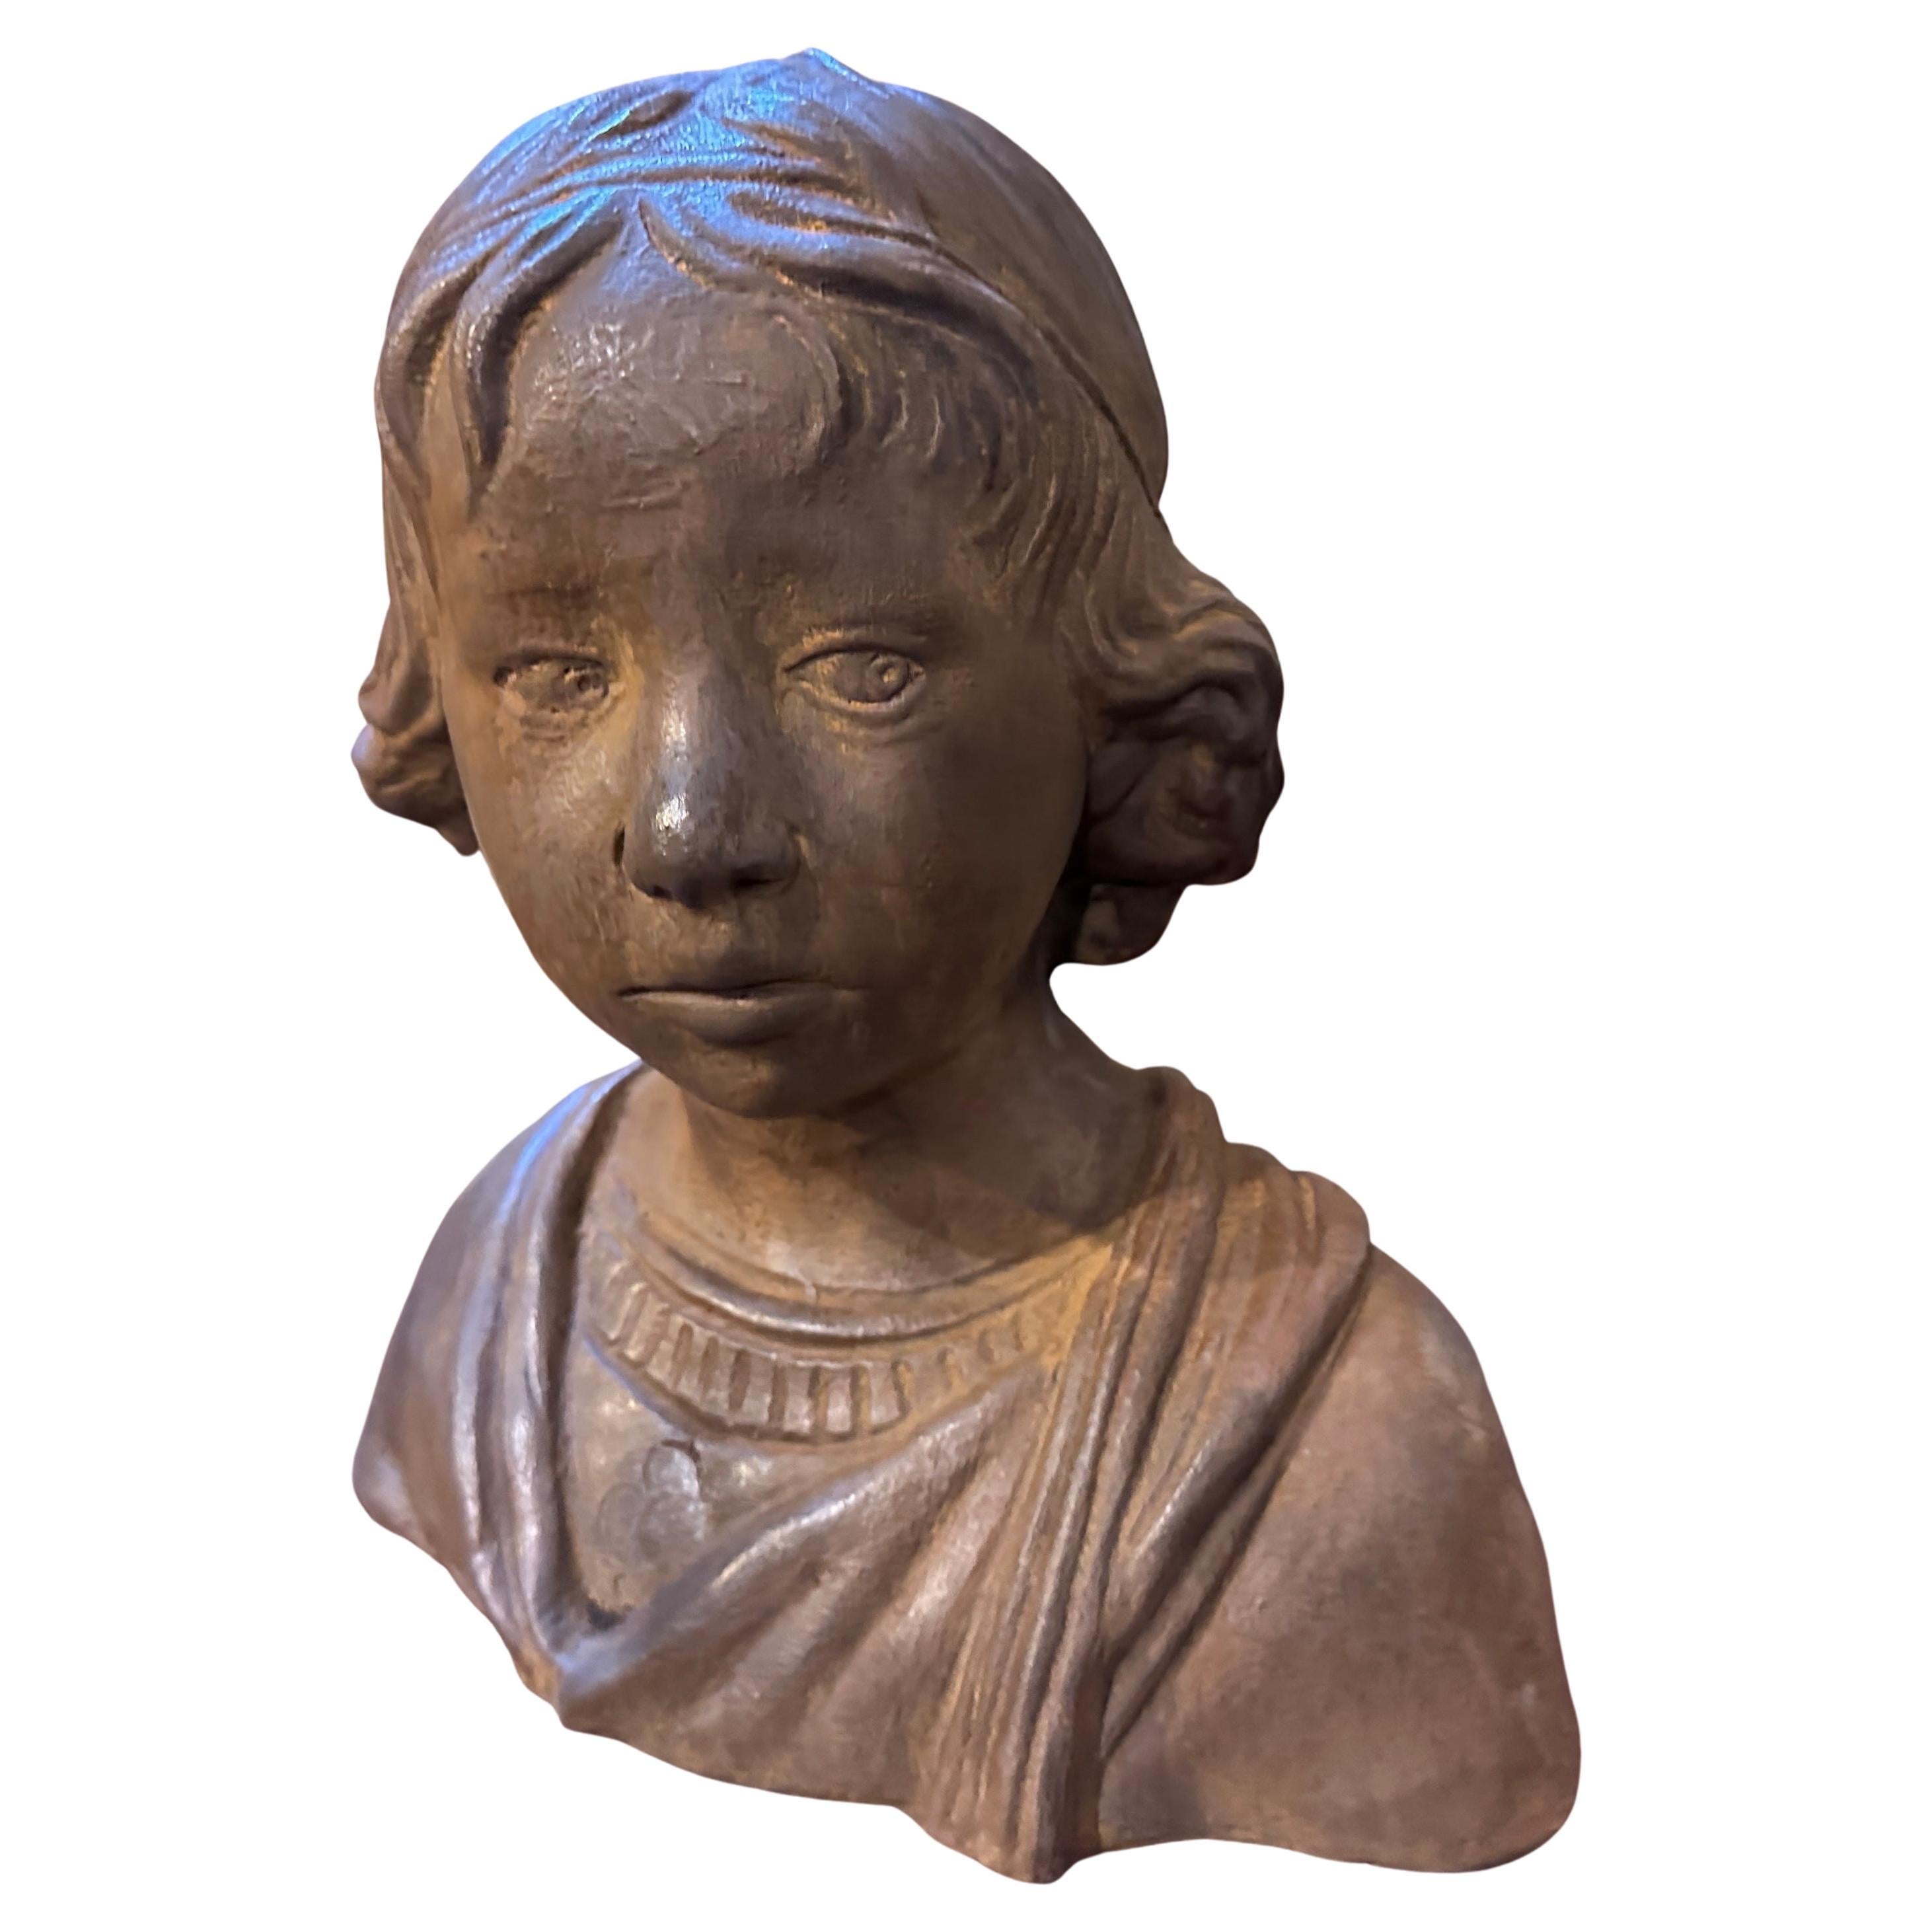 A 1930s handcrafted terracotta Sicilian bust of a young girl would be a unique and potentially valuable artifact. Sicily, an island in Italy, has a rich history of ceramic and terracotta craftsmanship, dating back to ancient times. During the 1930s,